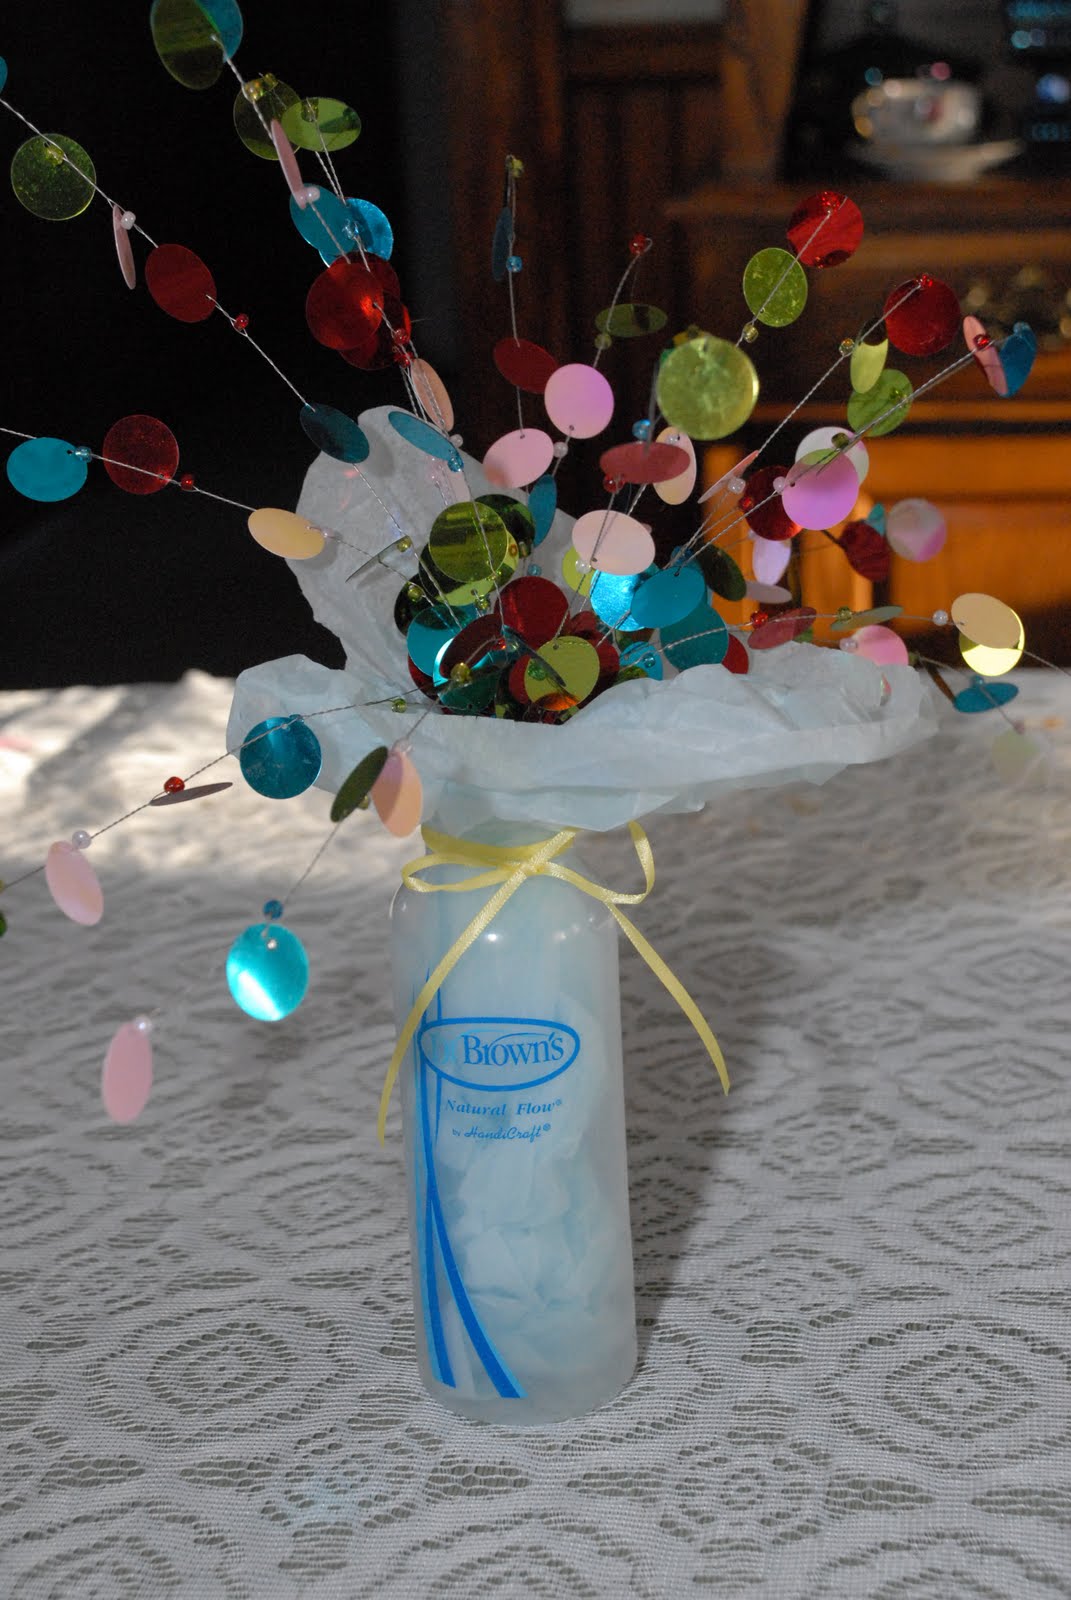 Life More Simply: DIY: Frugal and Green Centerpieces for a Baby Shower